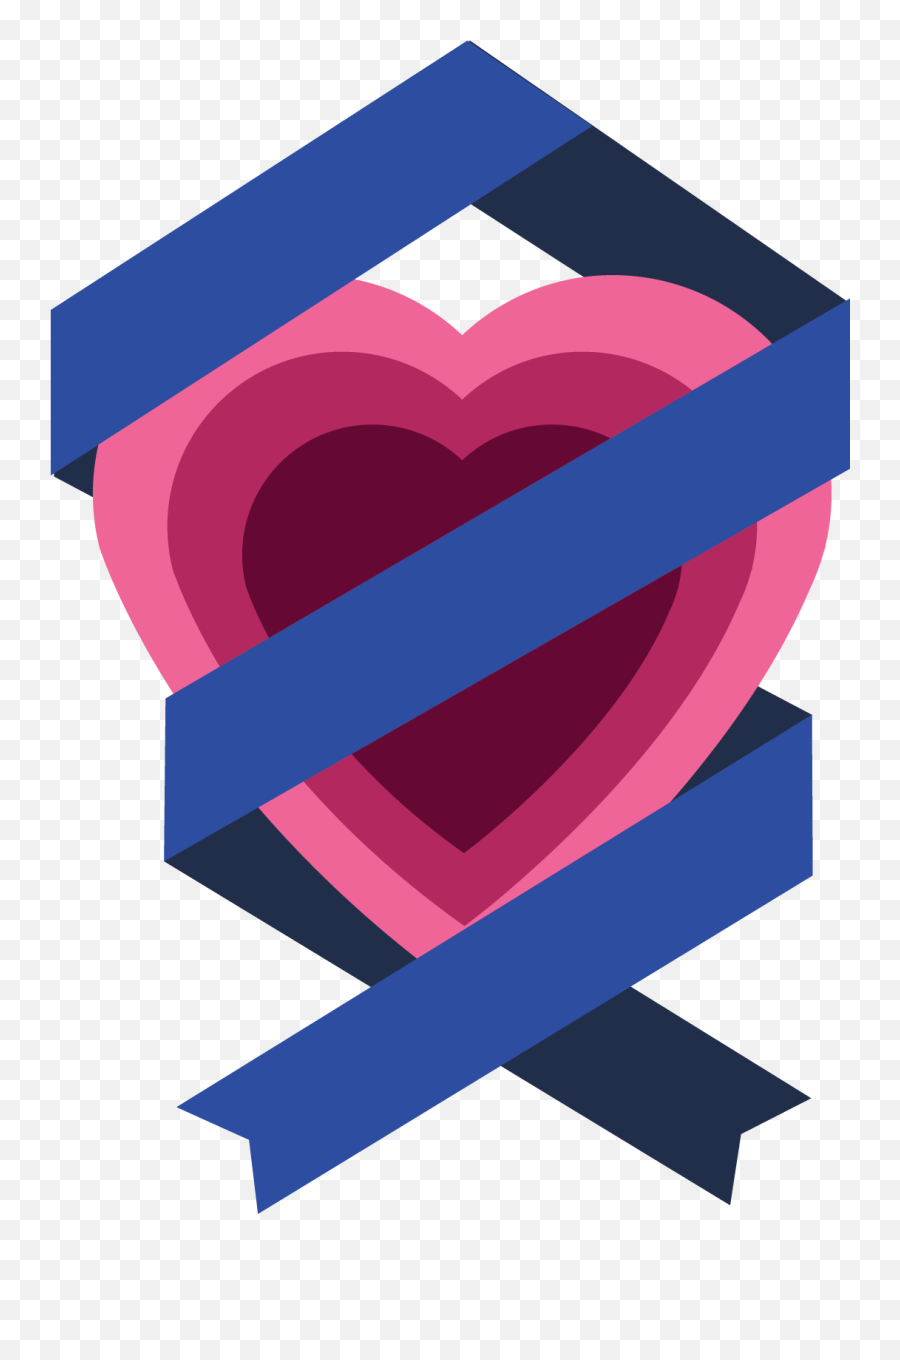 Colorectal Cancer Month Make Your Mom Proud - Ulman Foundation Emoji,What Emoji Goes With Cancer Sign